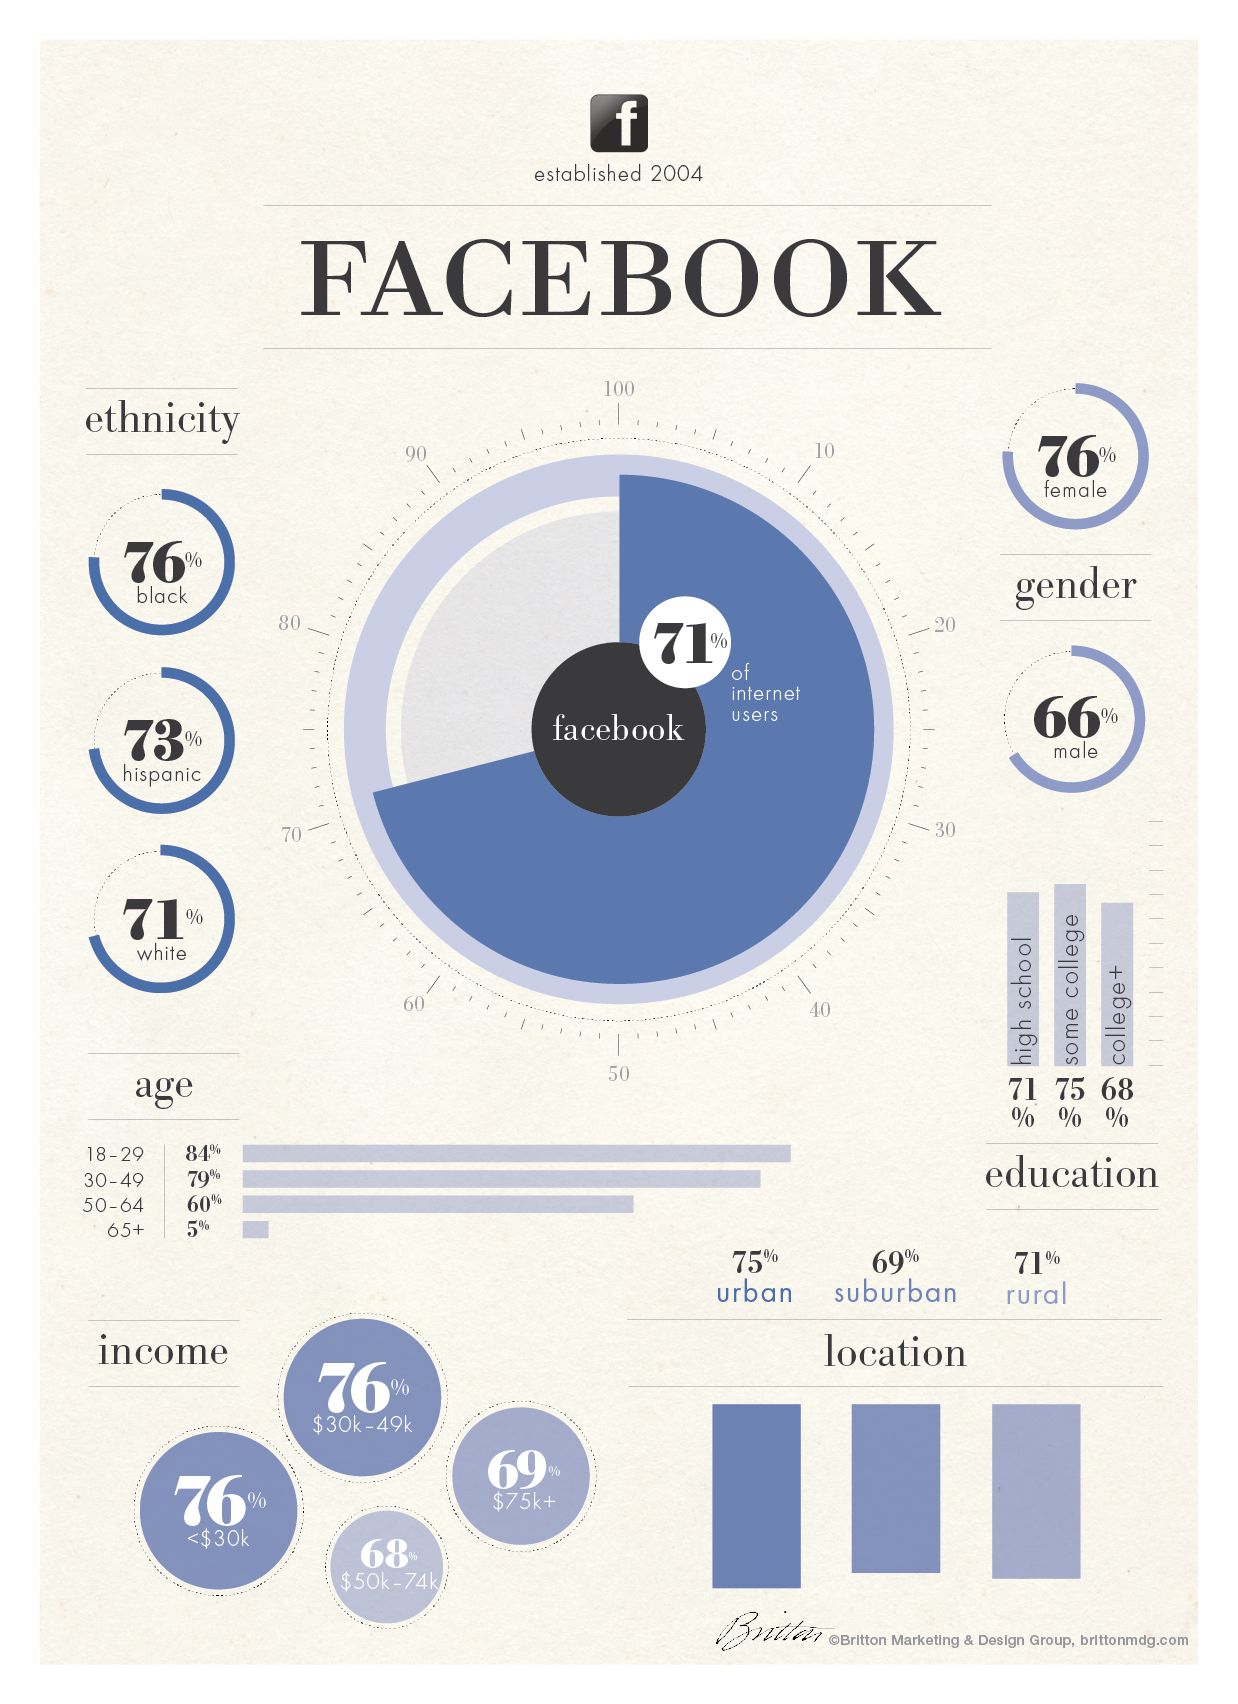 #Infographic: The demographics of Facebook users - #socialmedia